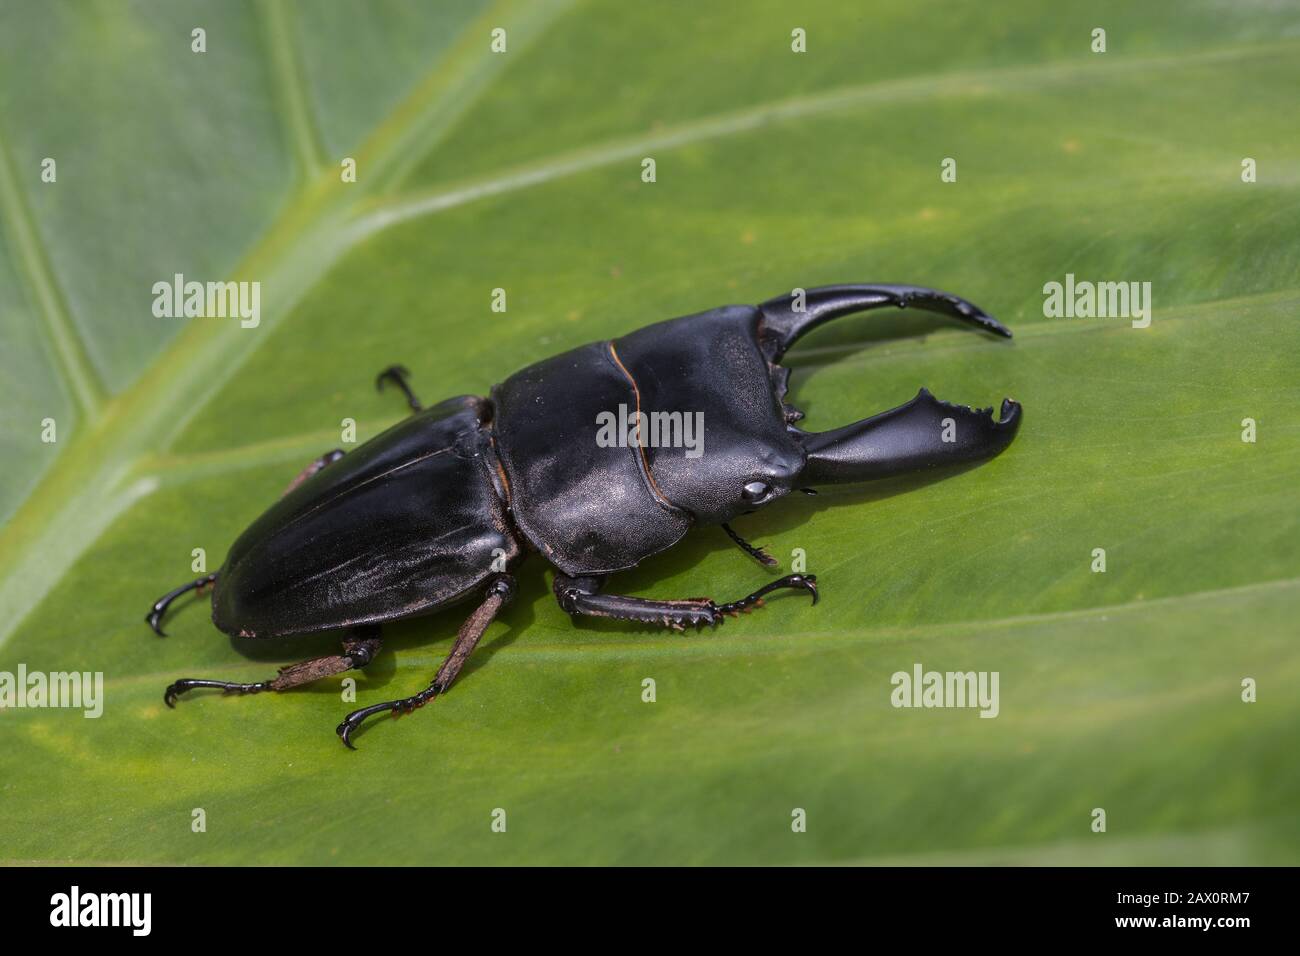 Dorcus parryii stag beetle in Malaysian rainforest. Stock Photo